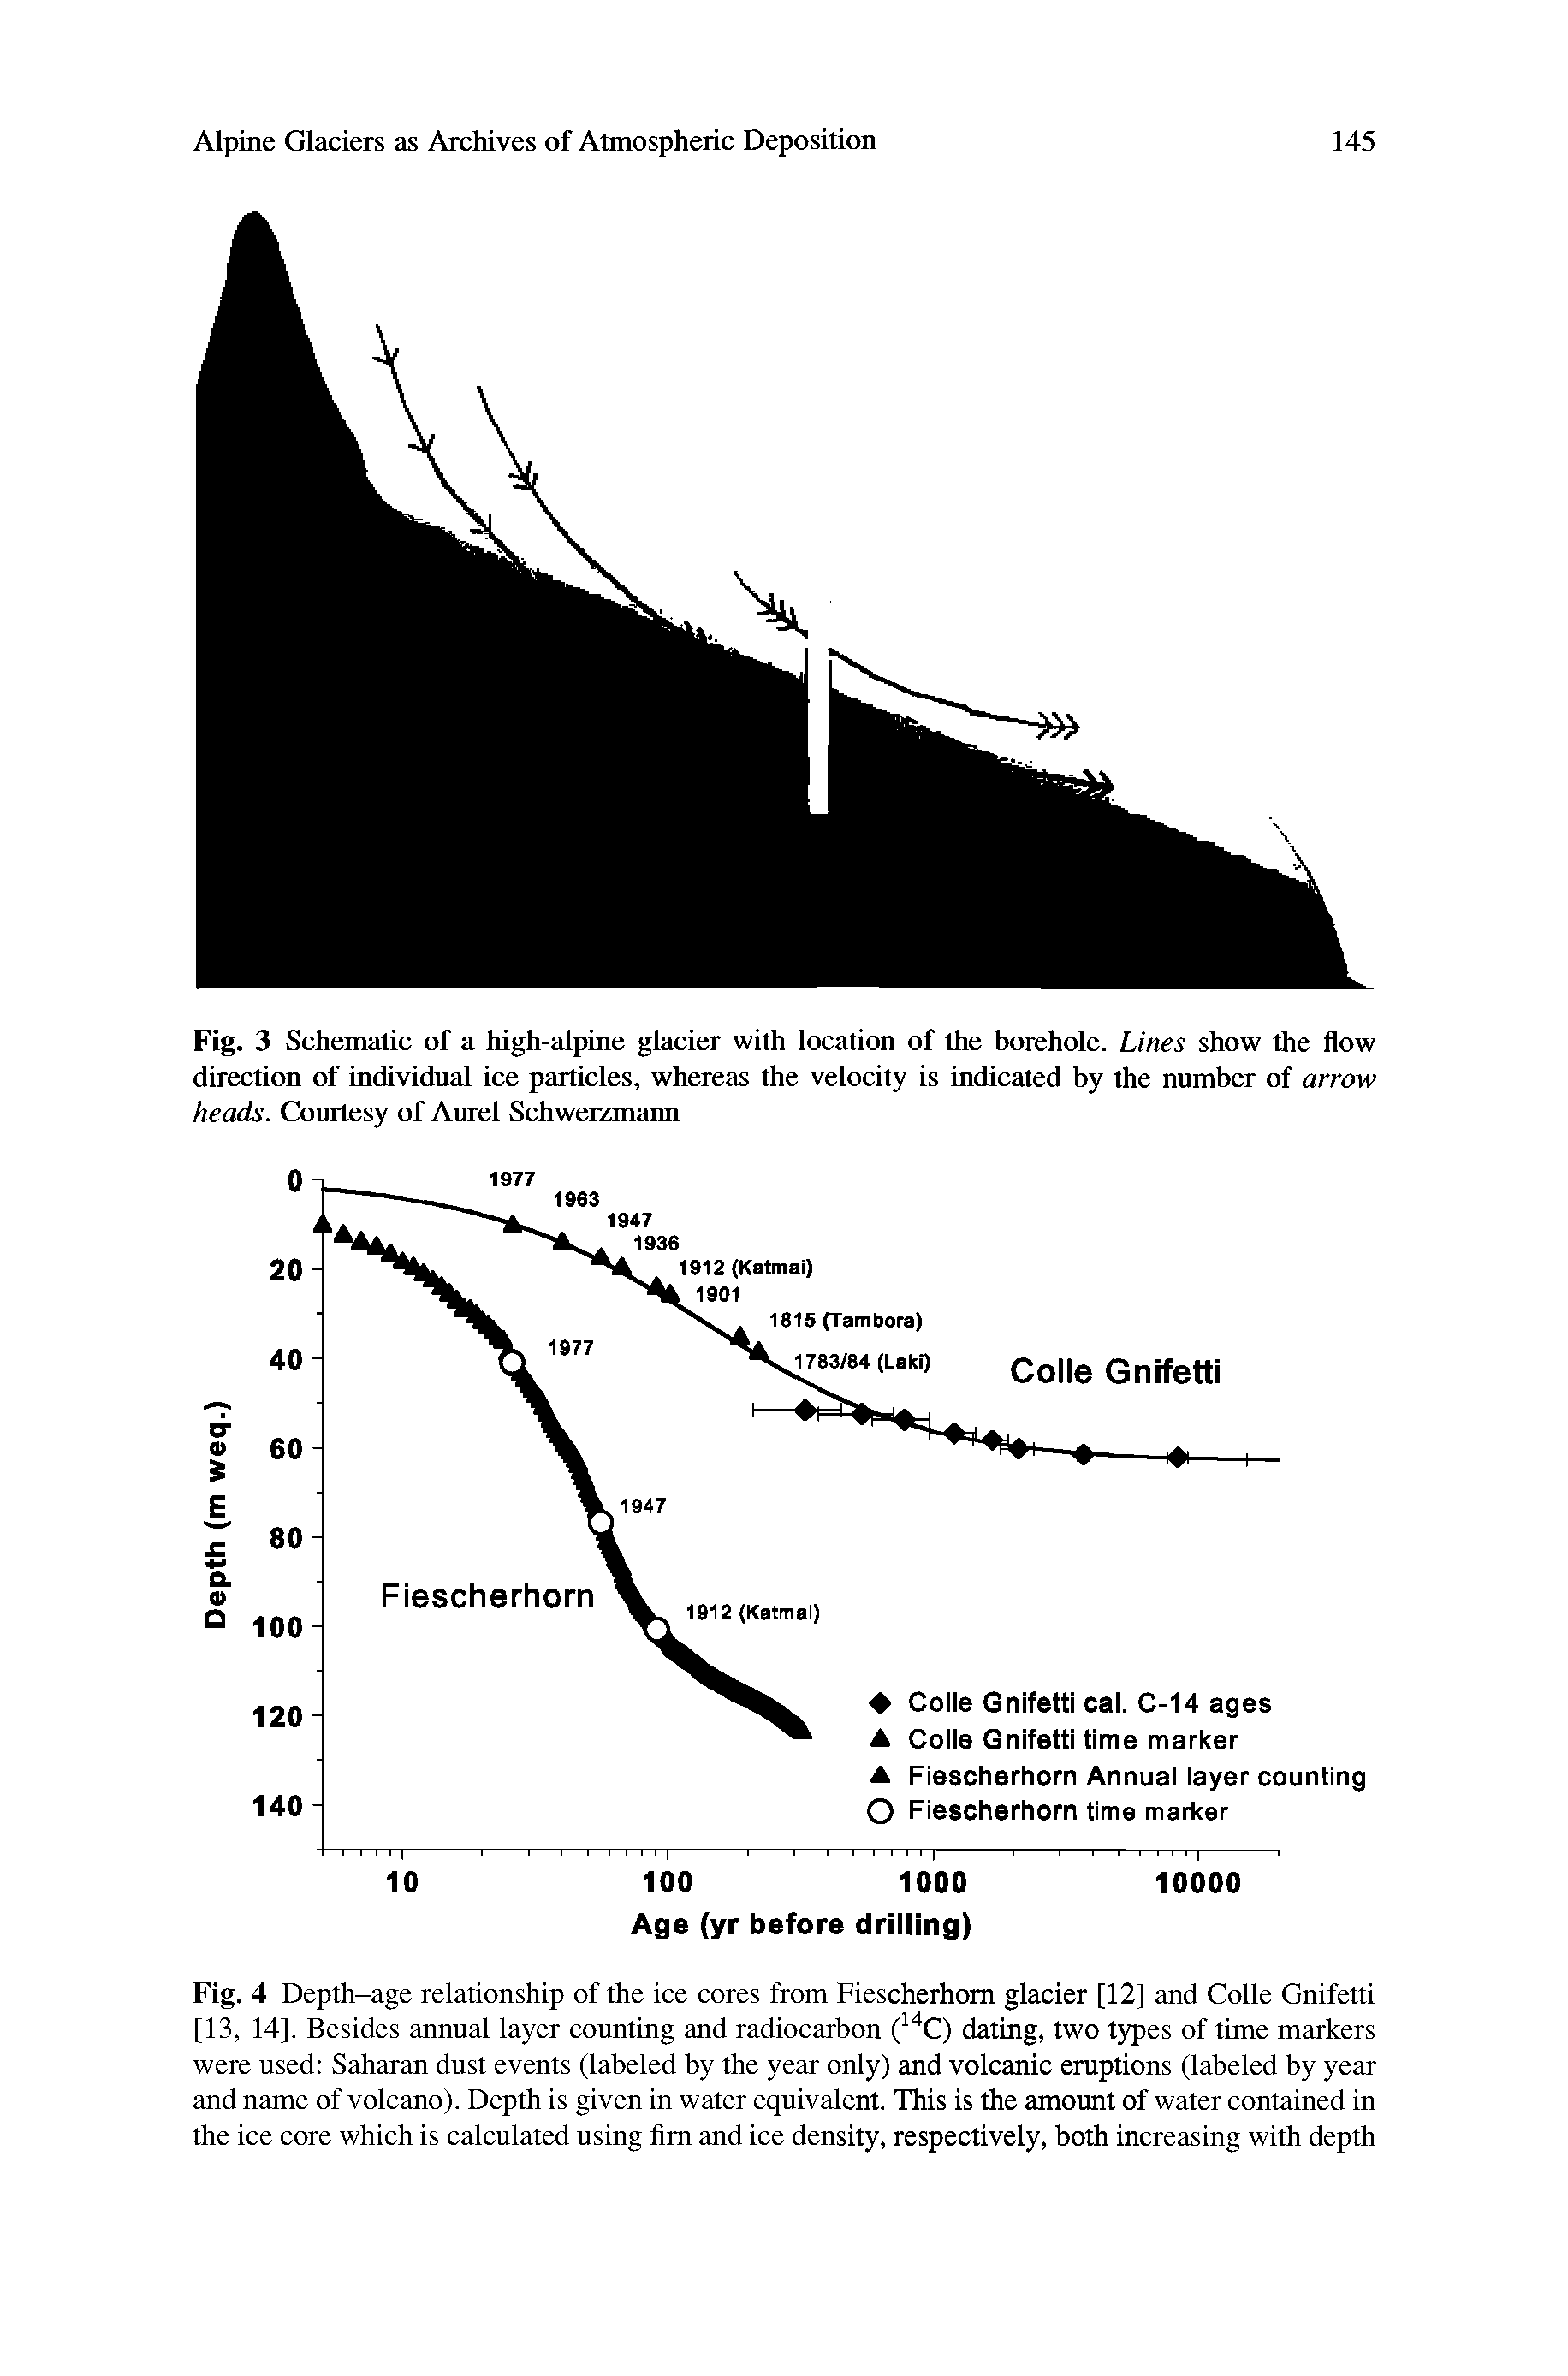 Fig. 4 Depth-age relationship of the ice cores from Fiescherhom glacier [12] and Colle Gnifetti [13, 14], Besides annual layer counting and radiocarbon ( C) dating, two types of time markers were used Saharan dust events (labeled by the year only) and volcanic eruptions (labeled by year and name of volcano). Depth is given in water equivalent. This is the amount of water contained in the ice core which is calculated using fim and ice density, respectively, both increasing with depth...